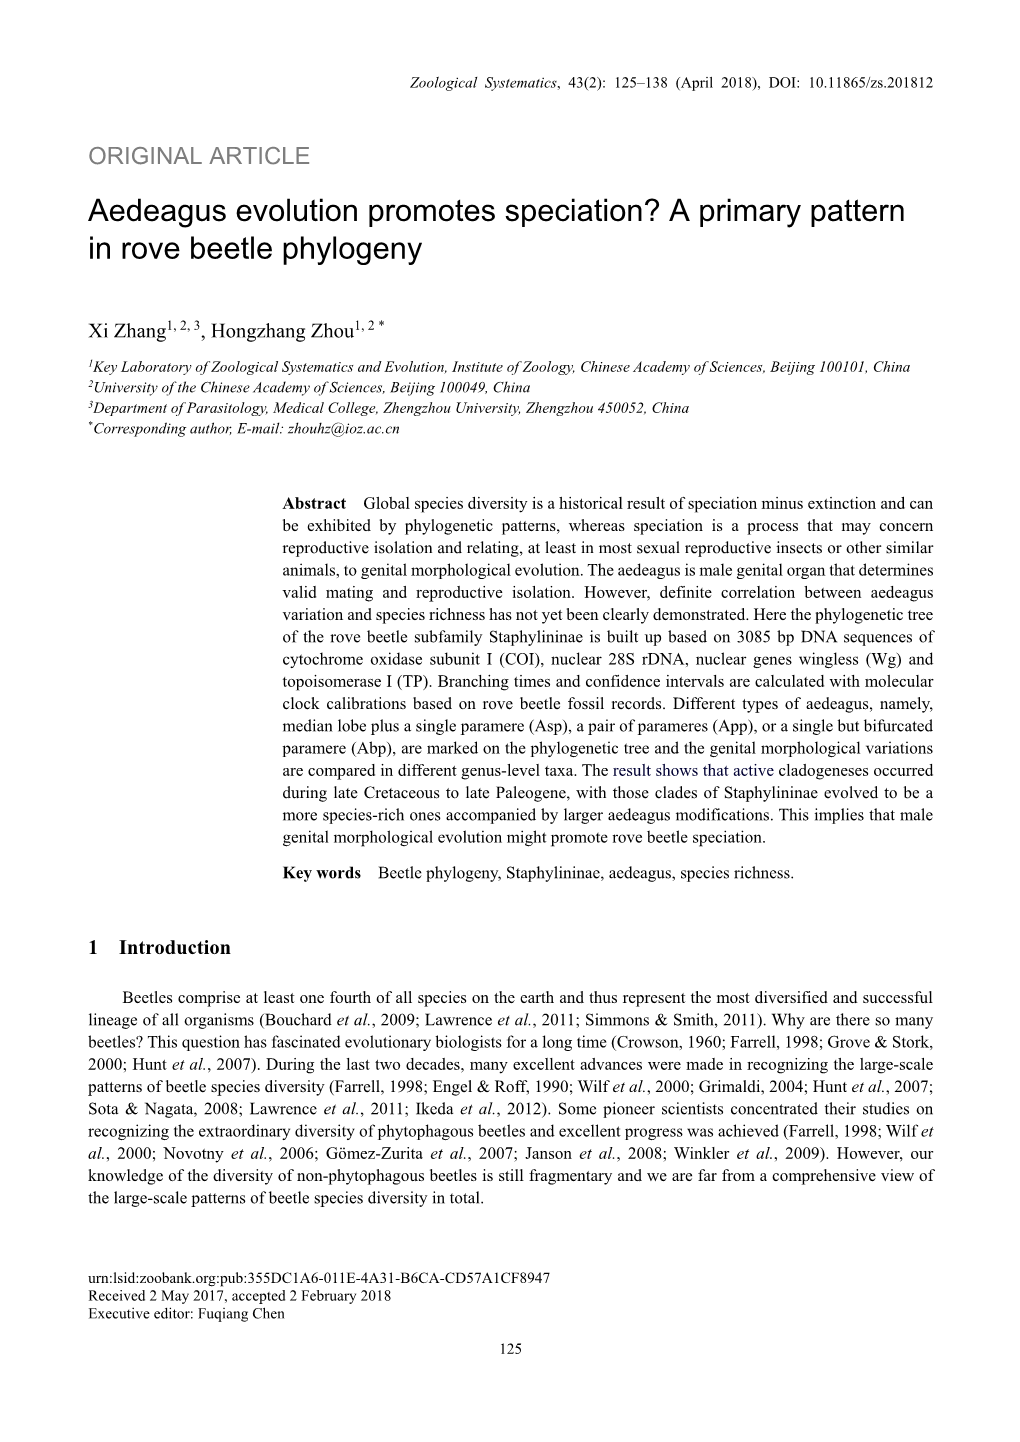 Aedeagus Evolution Promotes Speciation? a Primary Pattern in Rove Beetle Phylogeny